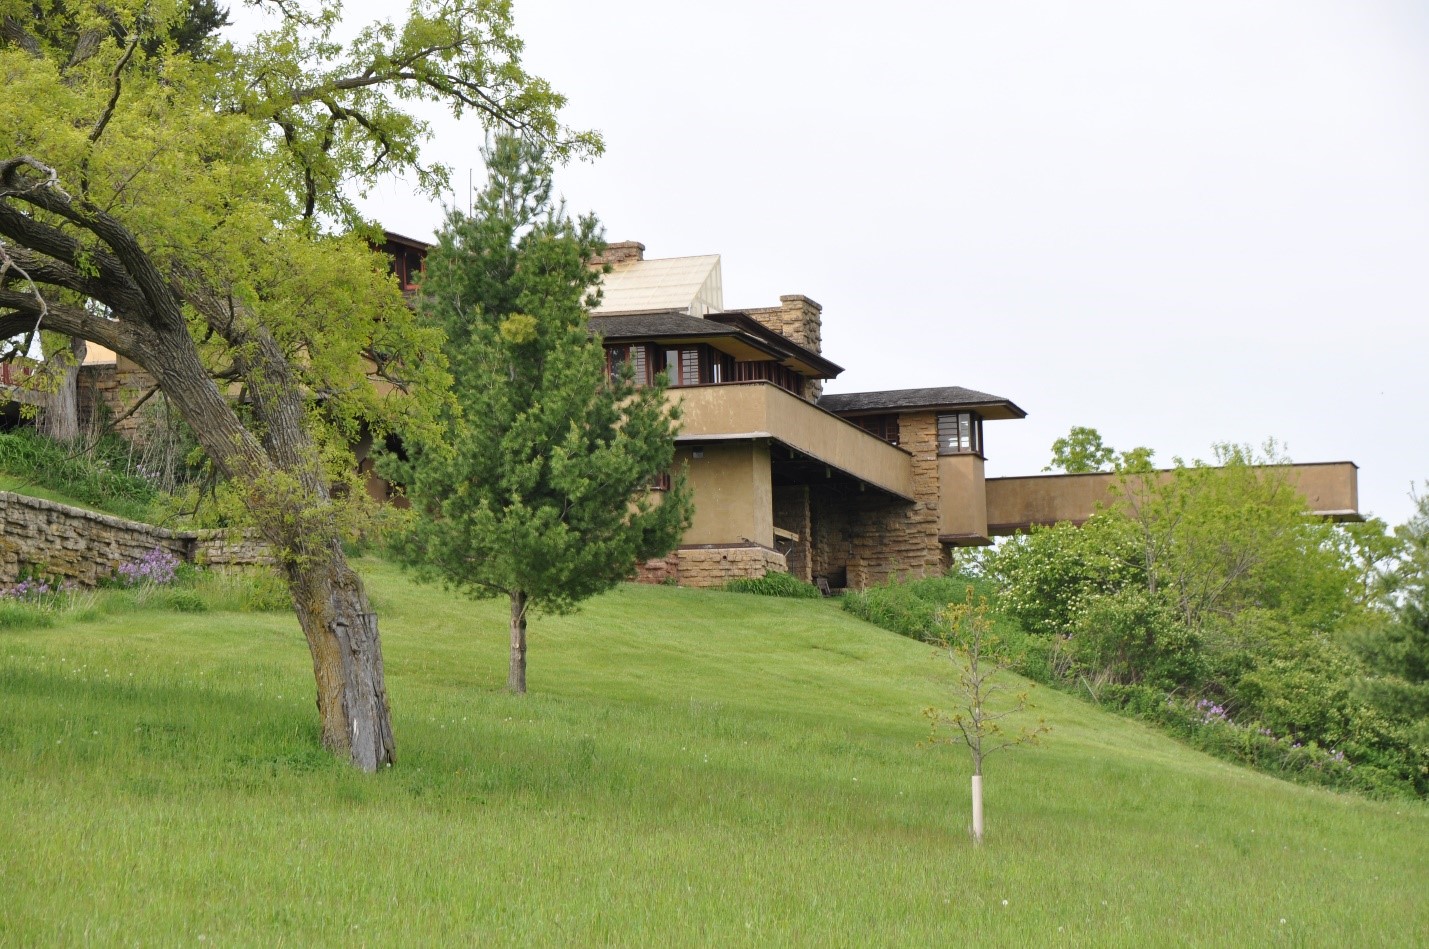 A photograph of a house from a distance on a grassy hilltop.